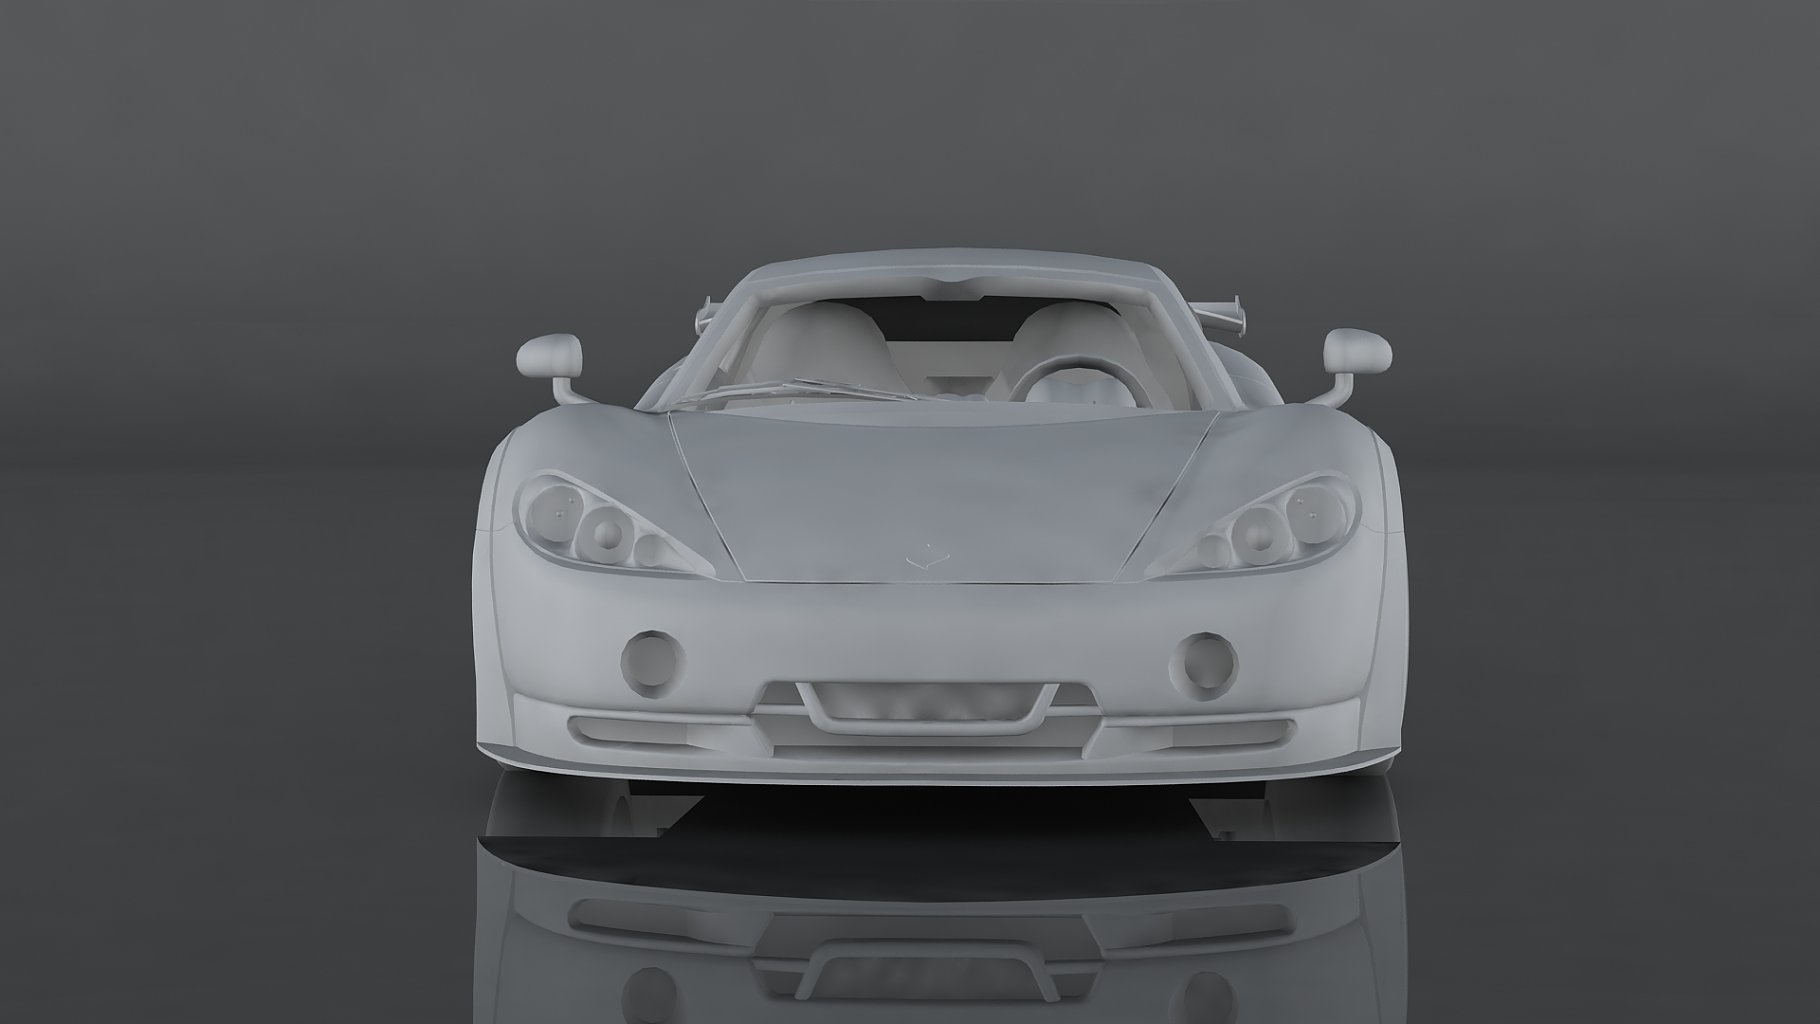 Gray ascari kz1r low poly 3d model front graphic mockup on a dark gray background.